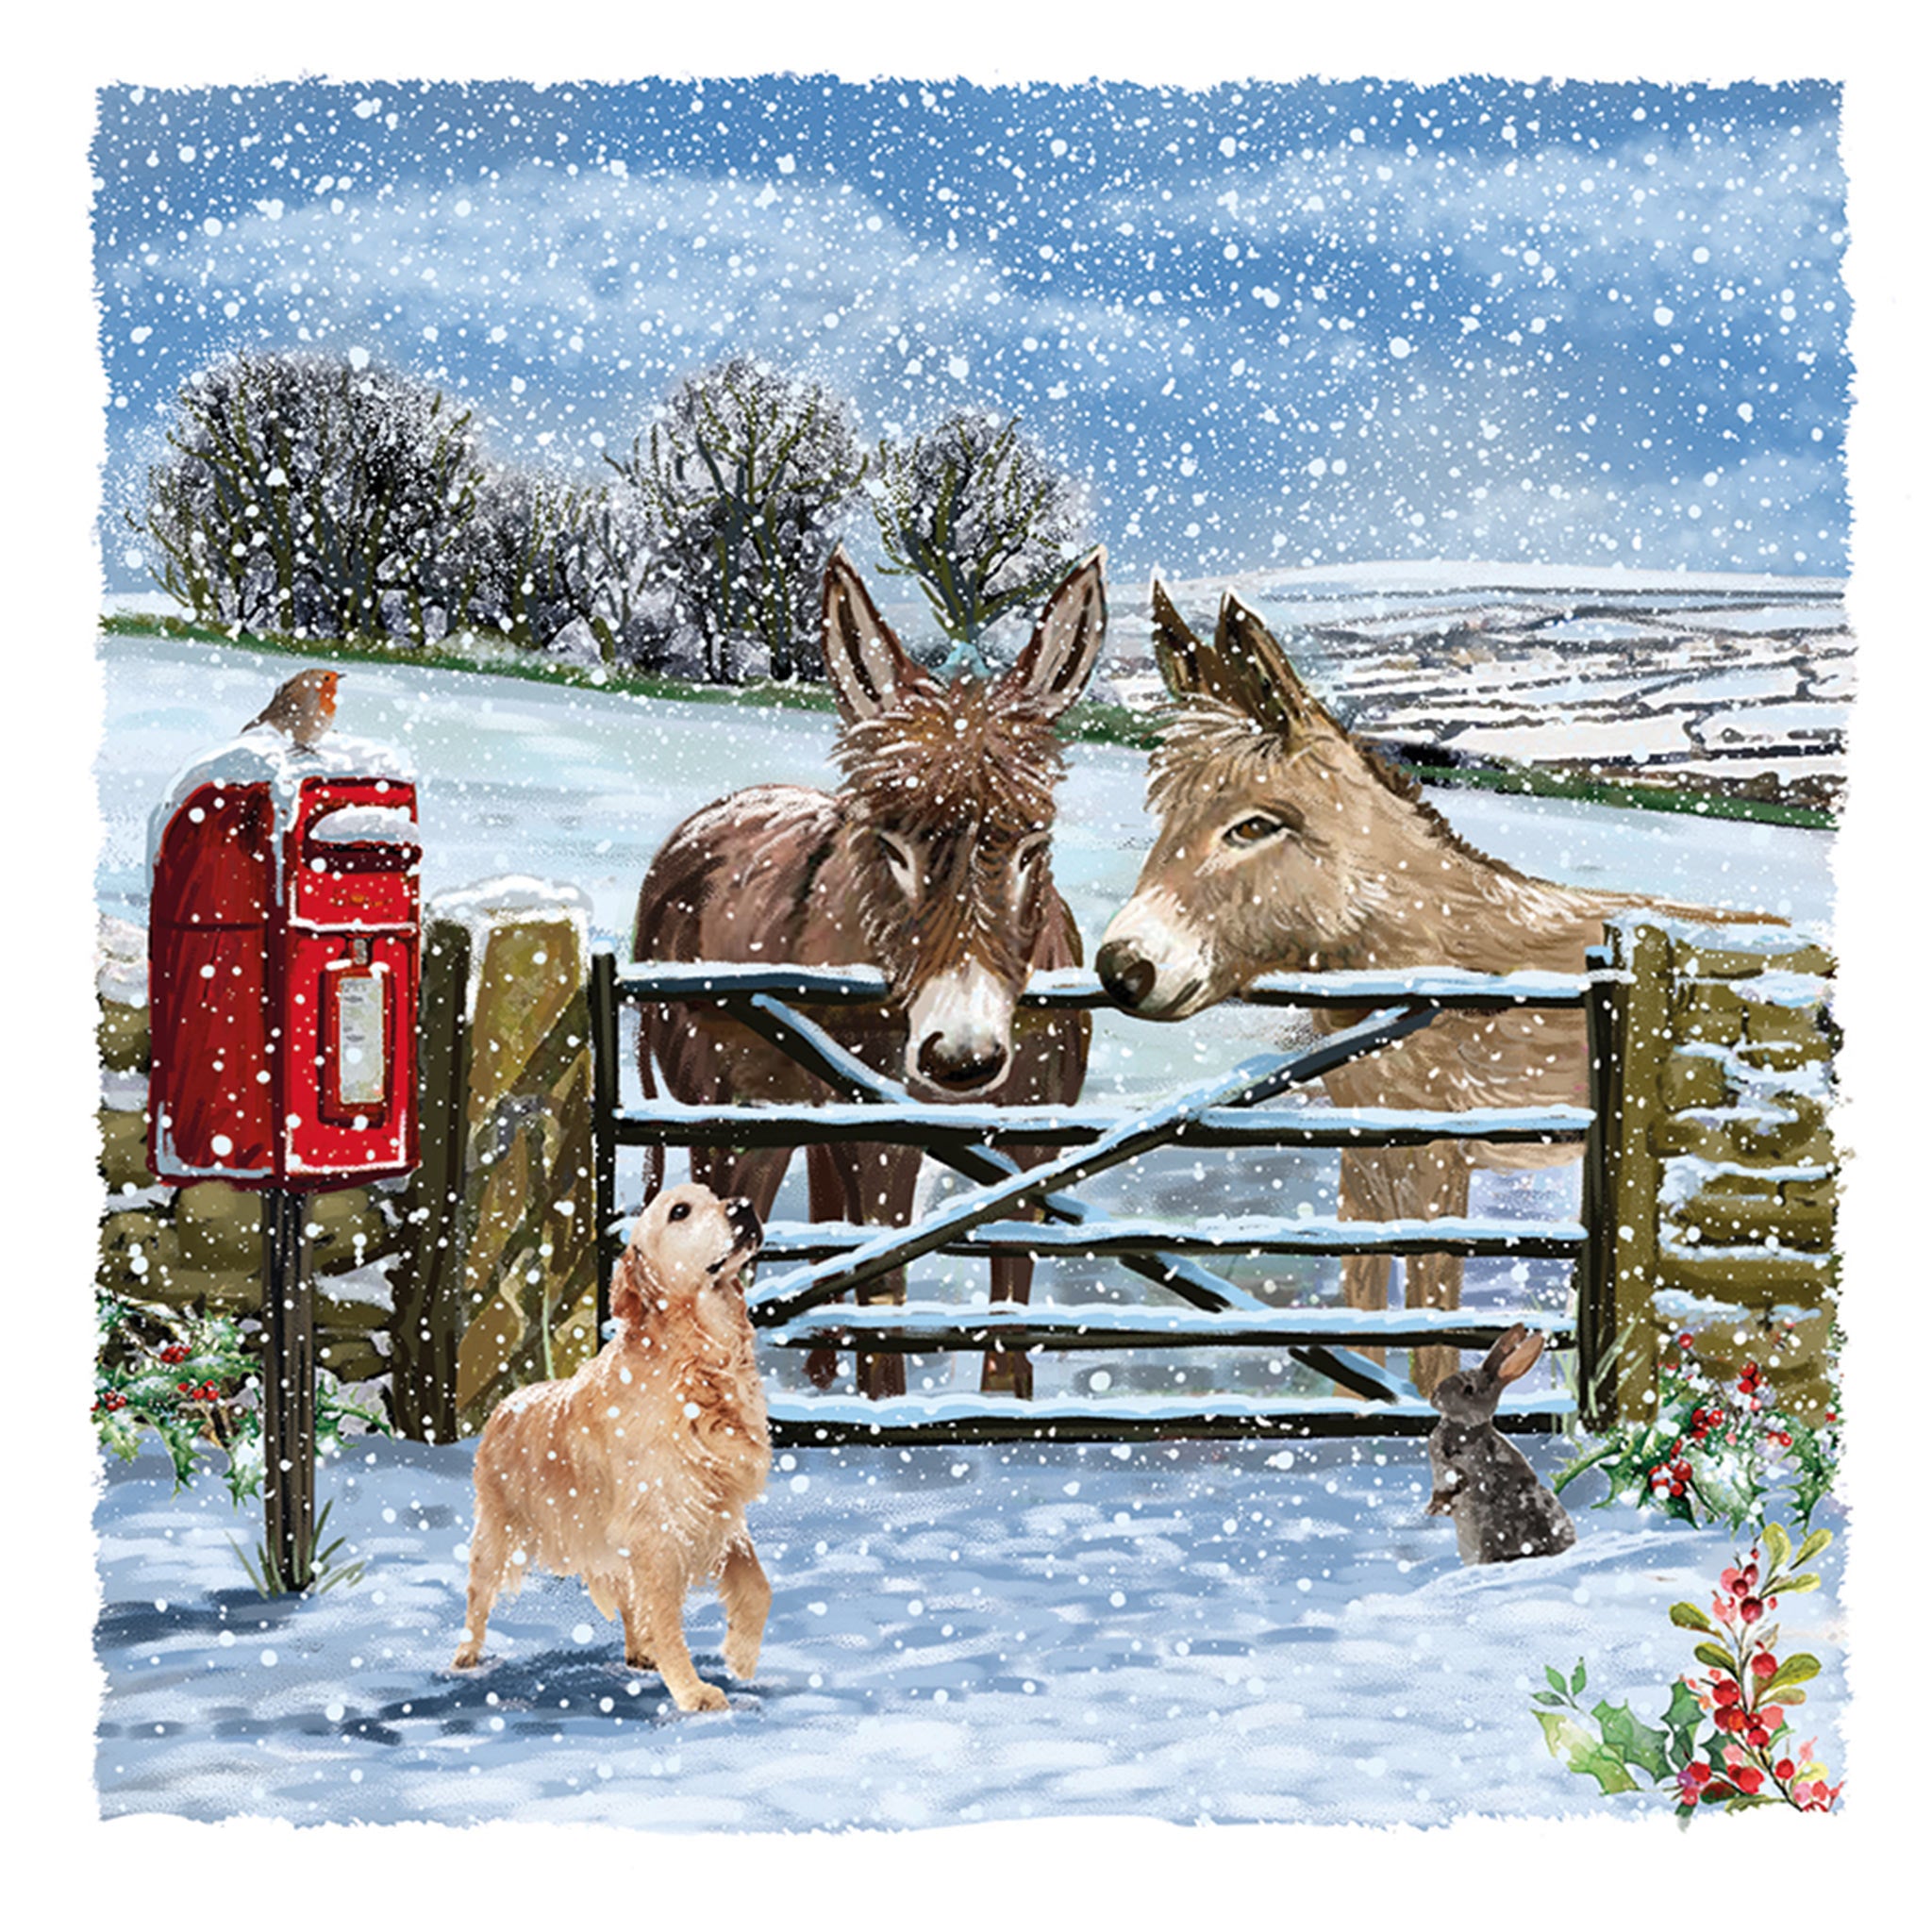 The design on this Christmas card is an illustration of a Golden Retriever and 2 donkeys, meeting at a gate in a snowy field.